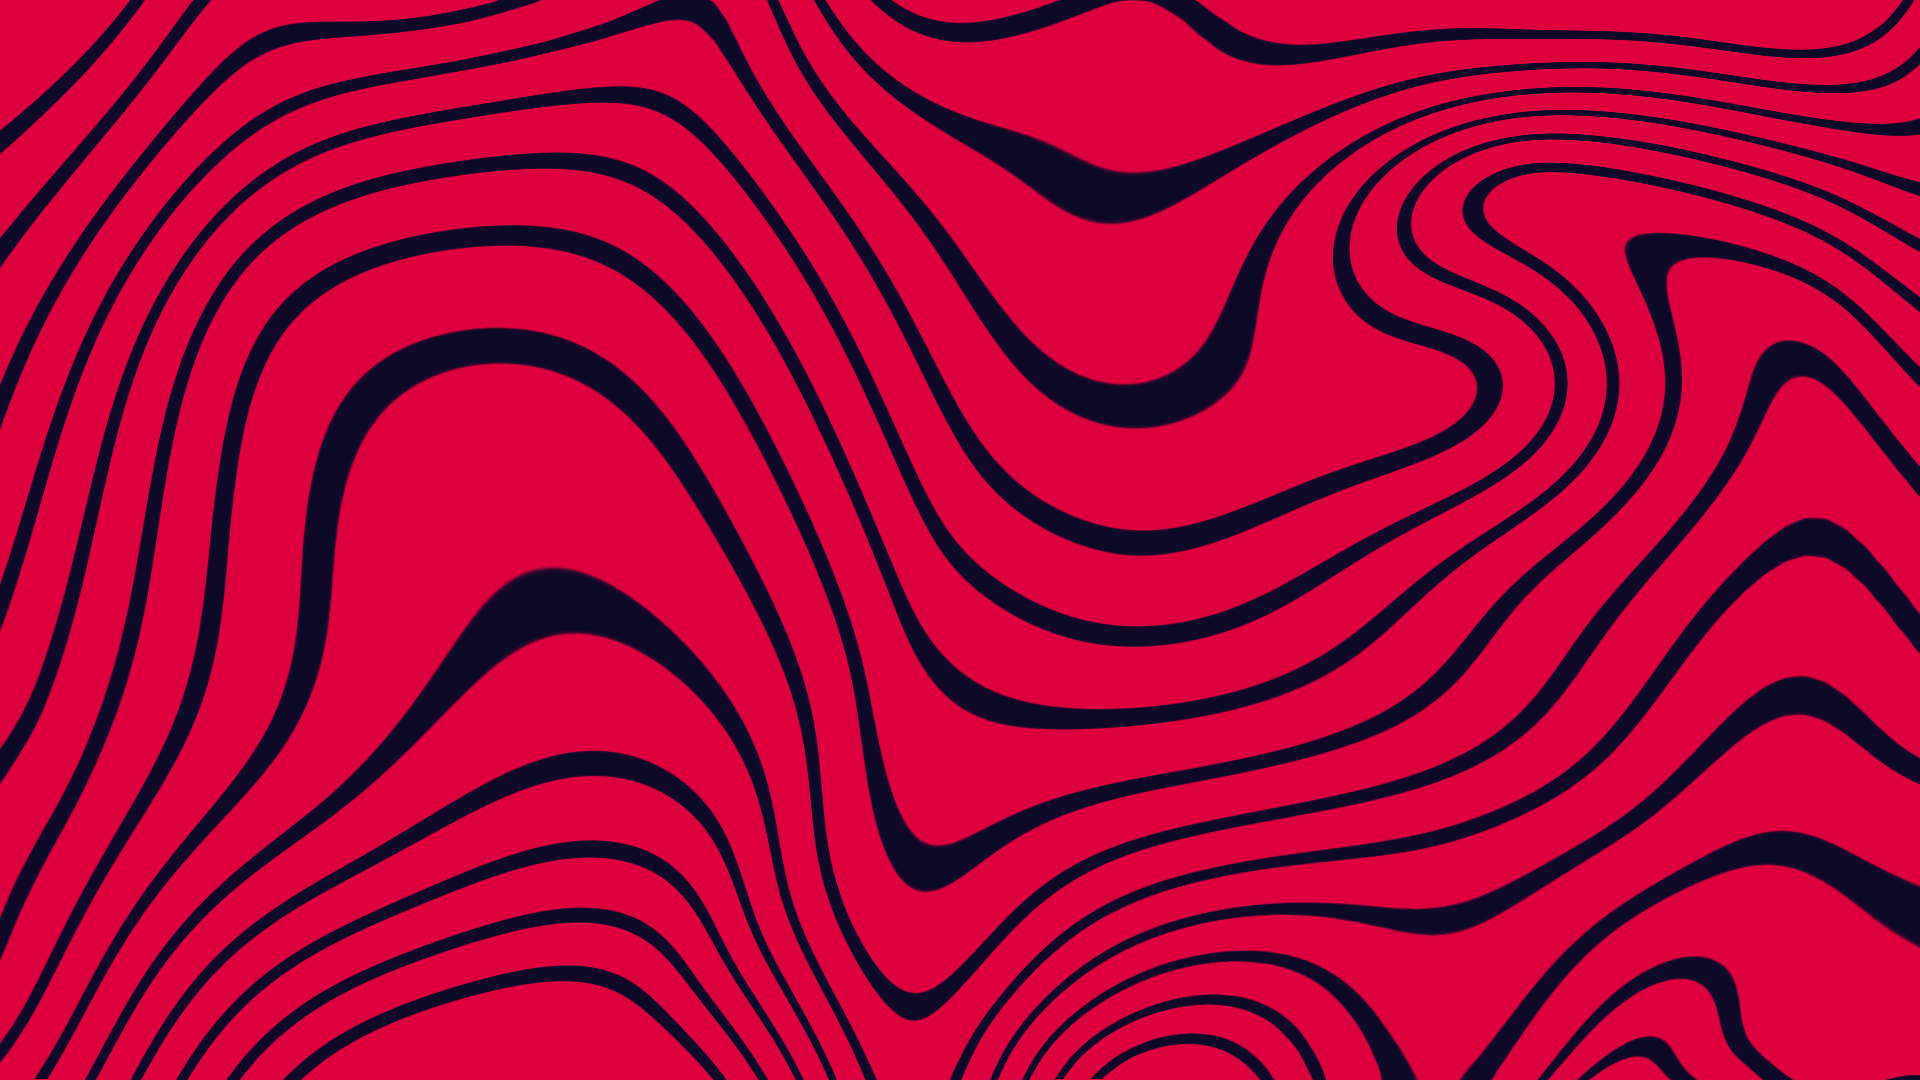 [1920x1080] Pewdiepie Inspired Background - Pewdiepie Red And Black , HD Wallpaper & Backgrounds